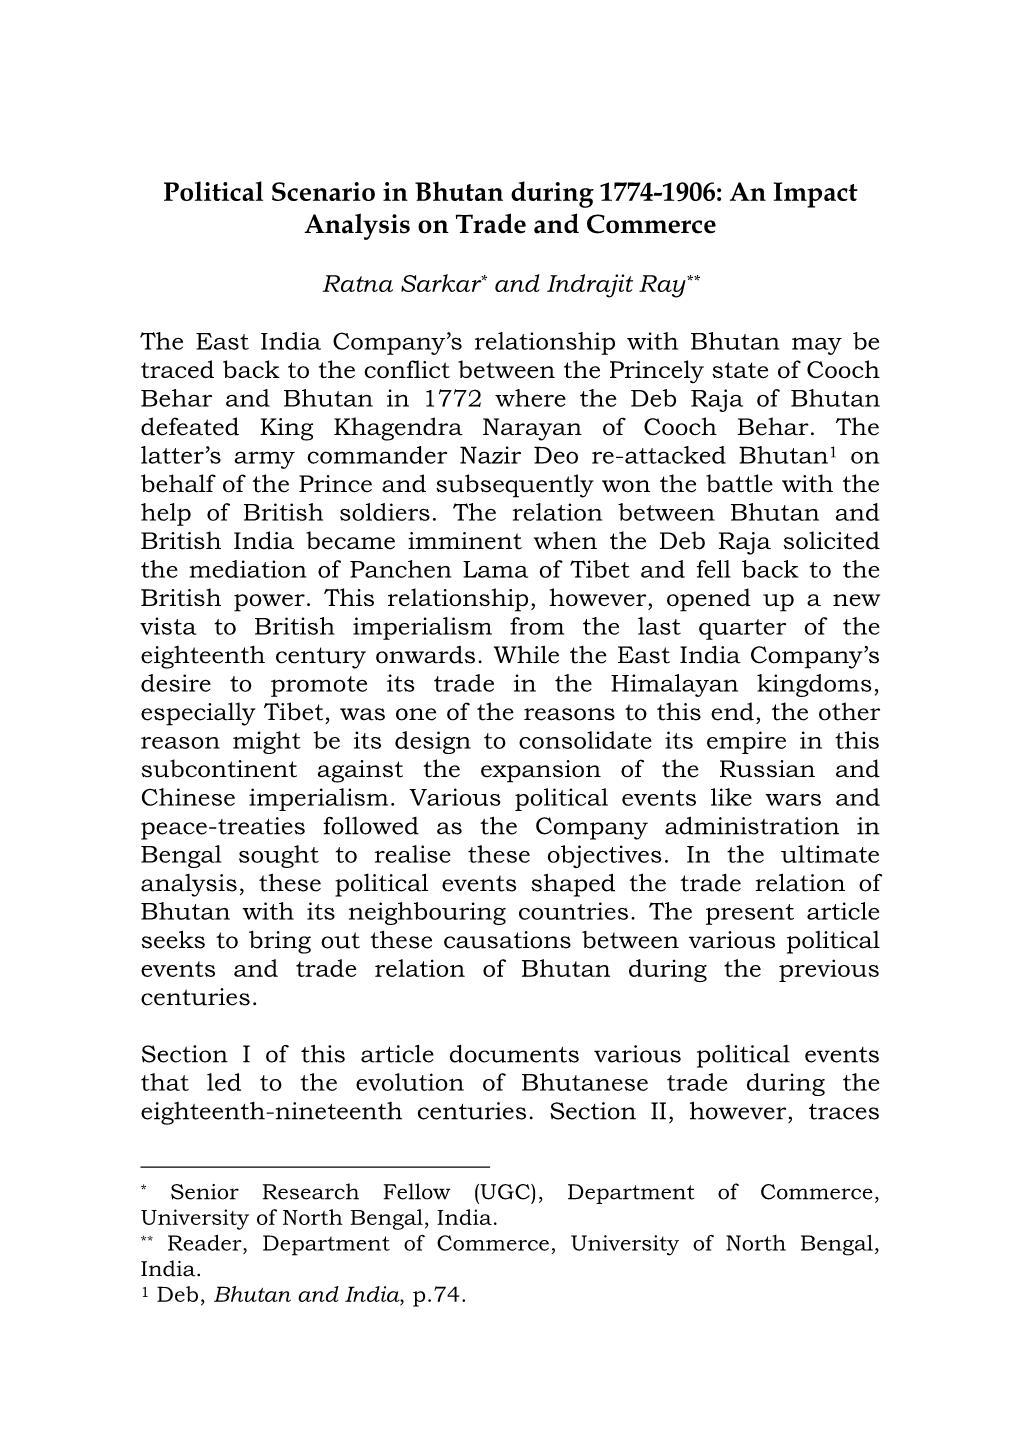 Political Scenario in Bhutan During 1774-1906: an Impact Analysis on Trade and Commerce